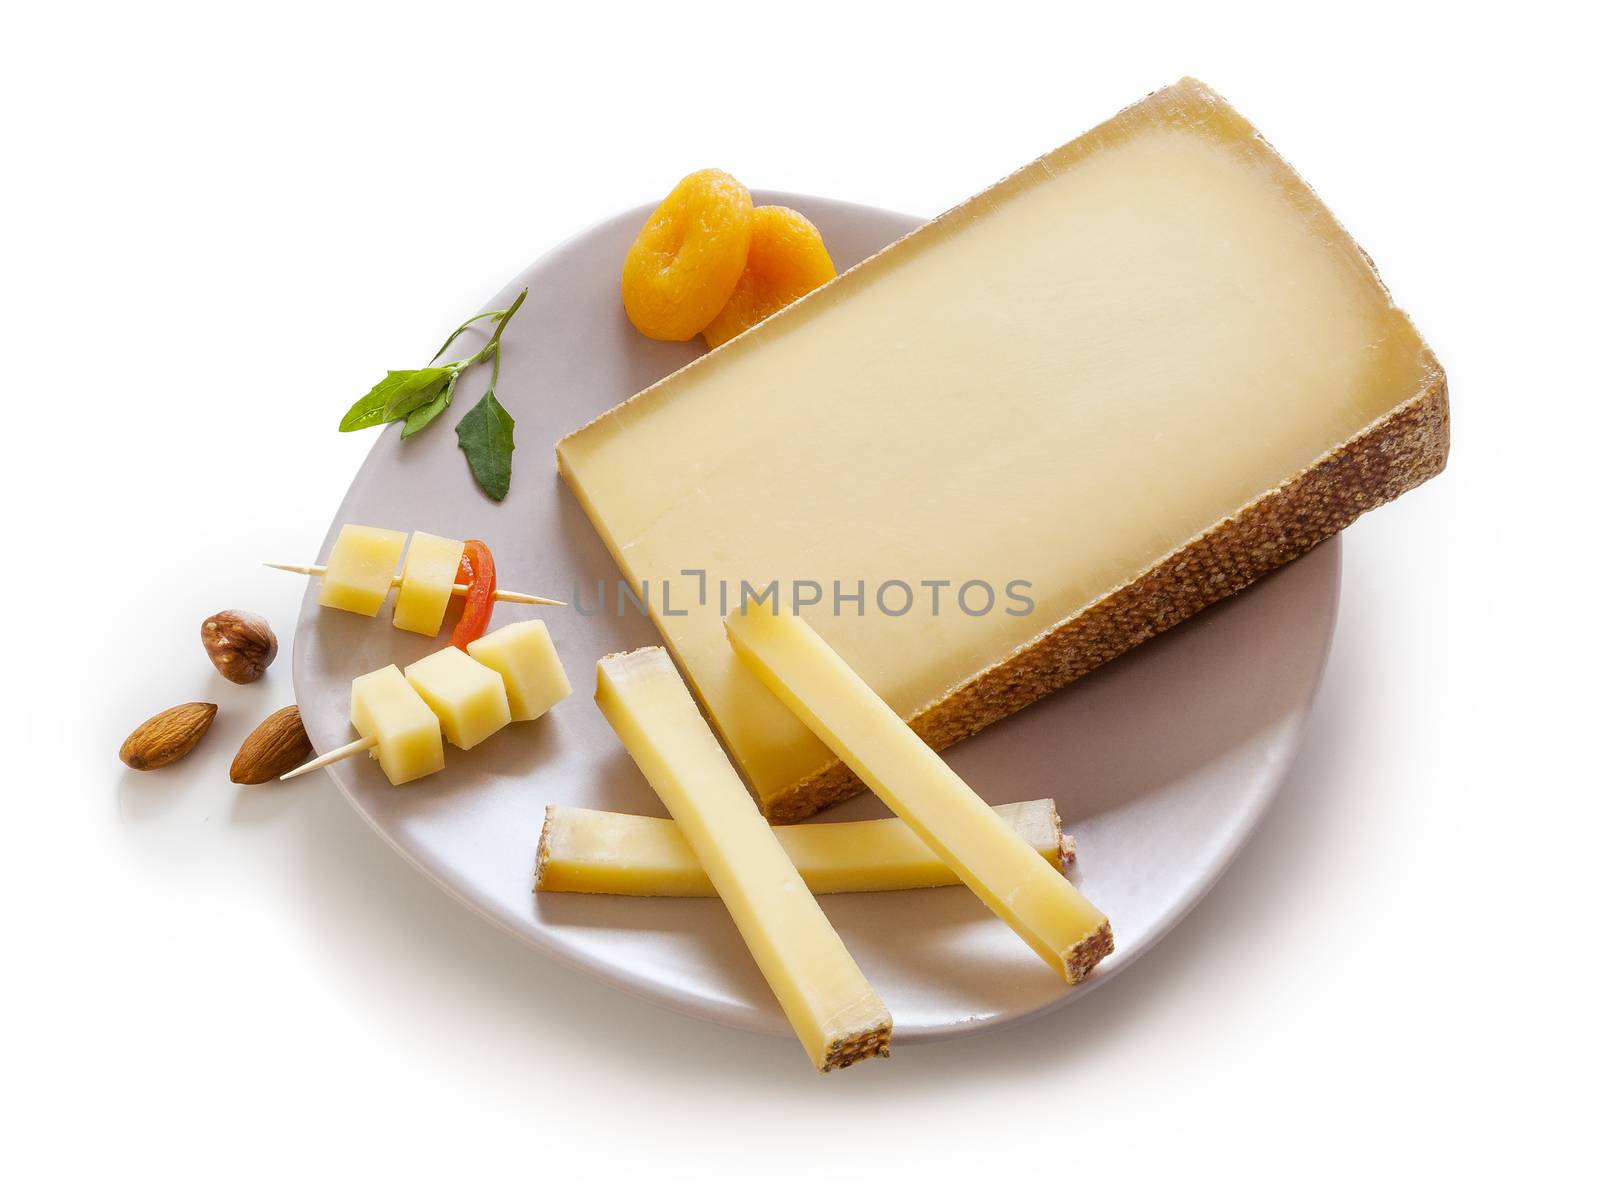 Swiss Gruyere cheese in a plate by vwalakte